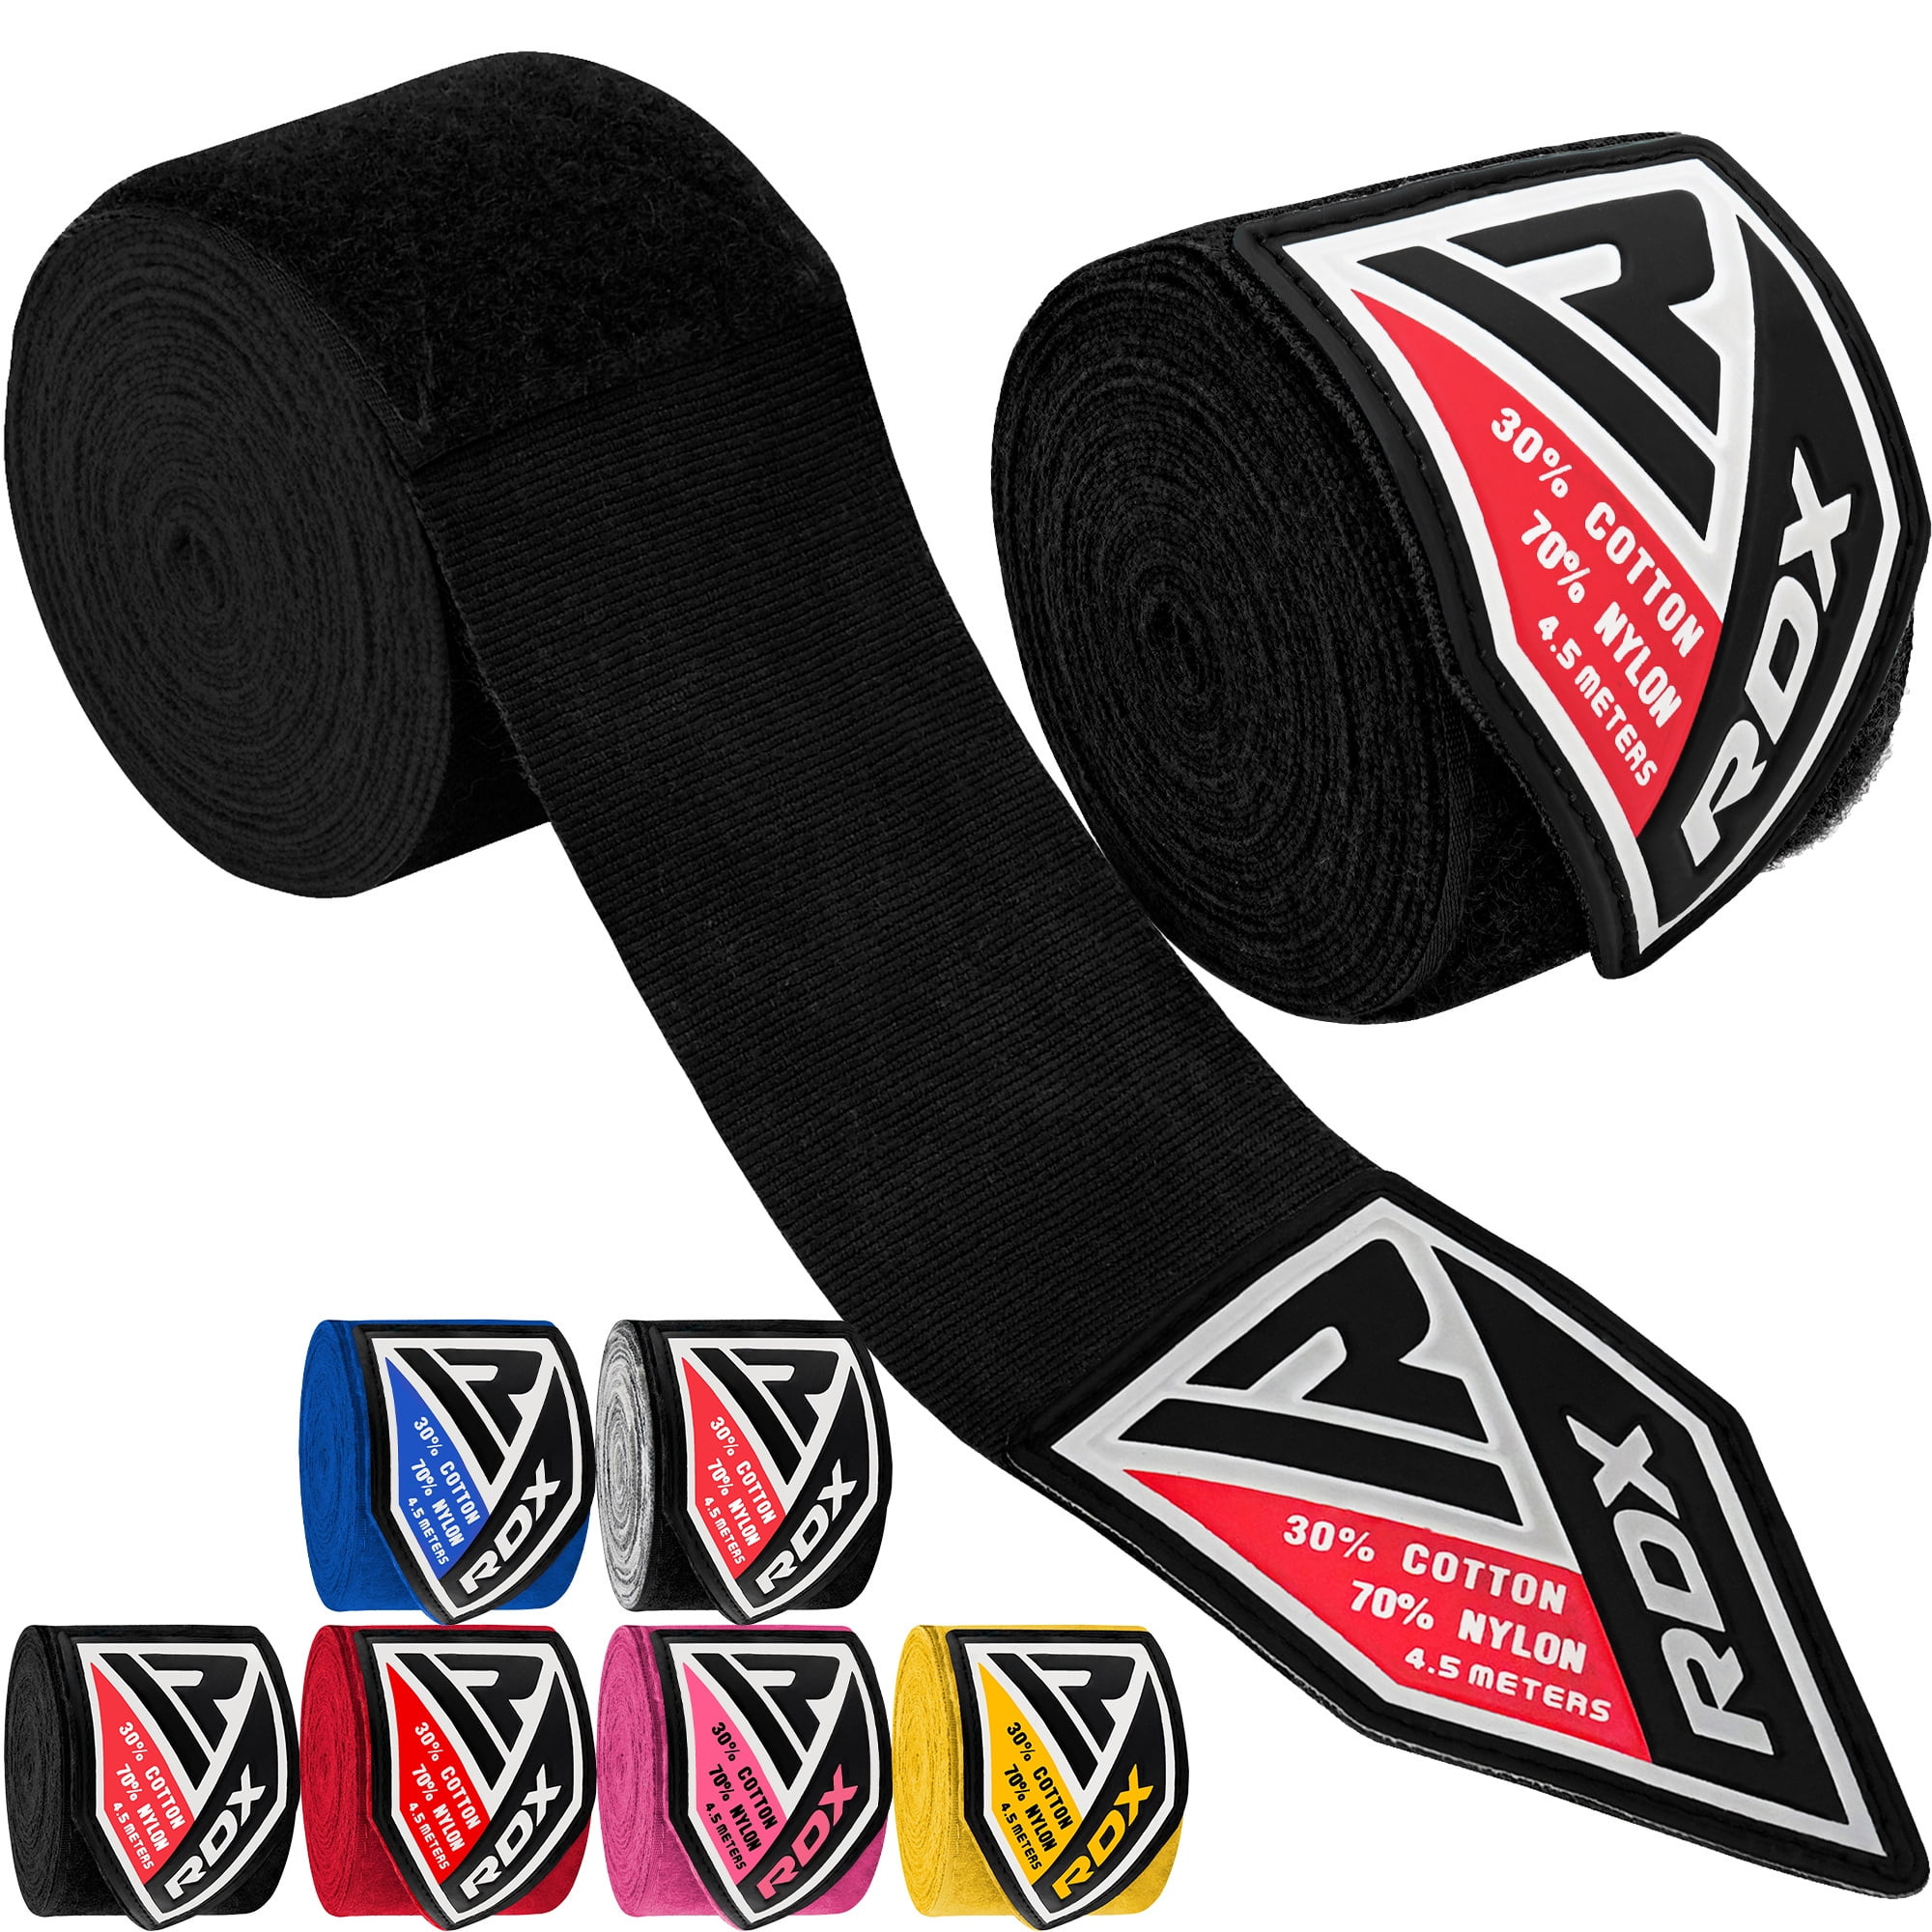 RDX Inner Boxing Gloves Hand Wraps MMA Elasticated Fist Protector MuayThai 